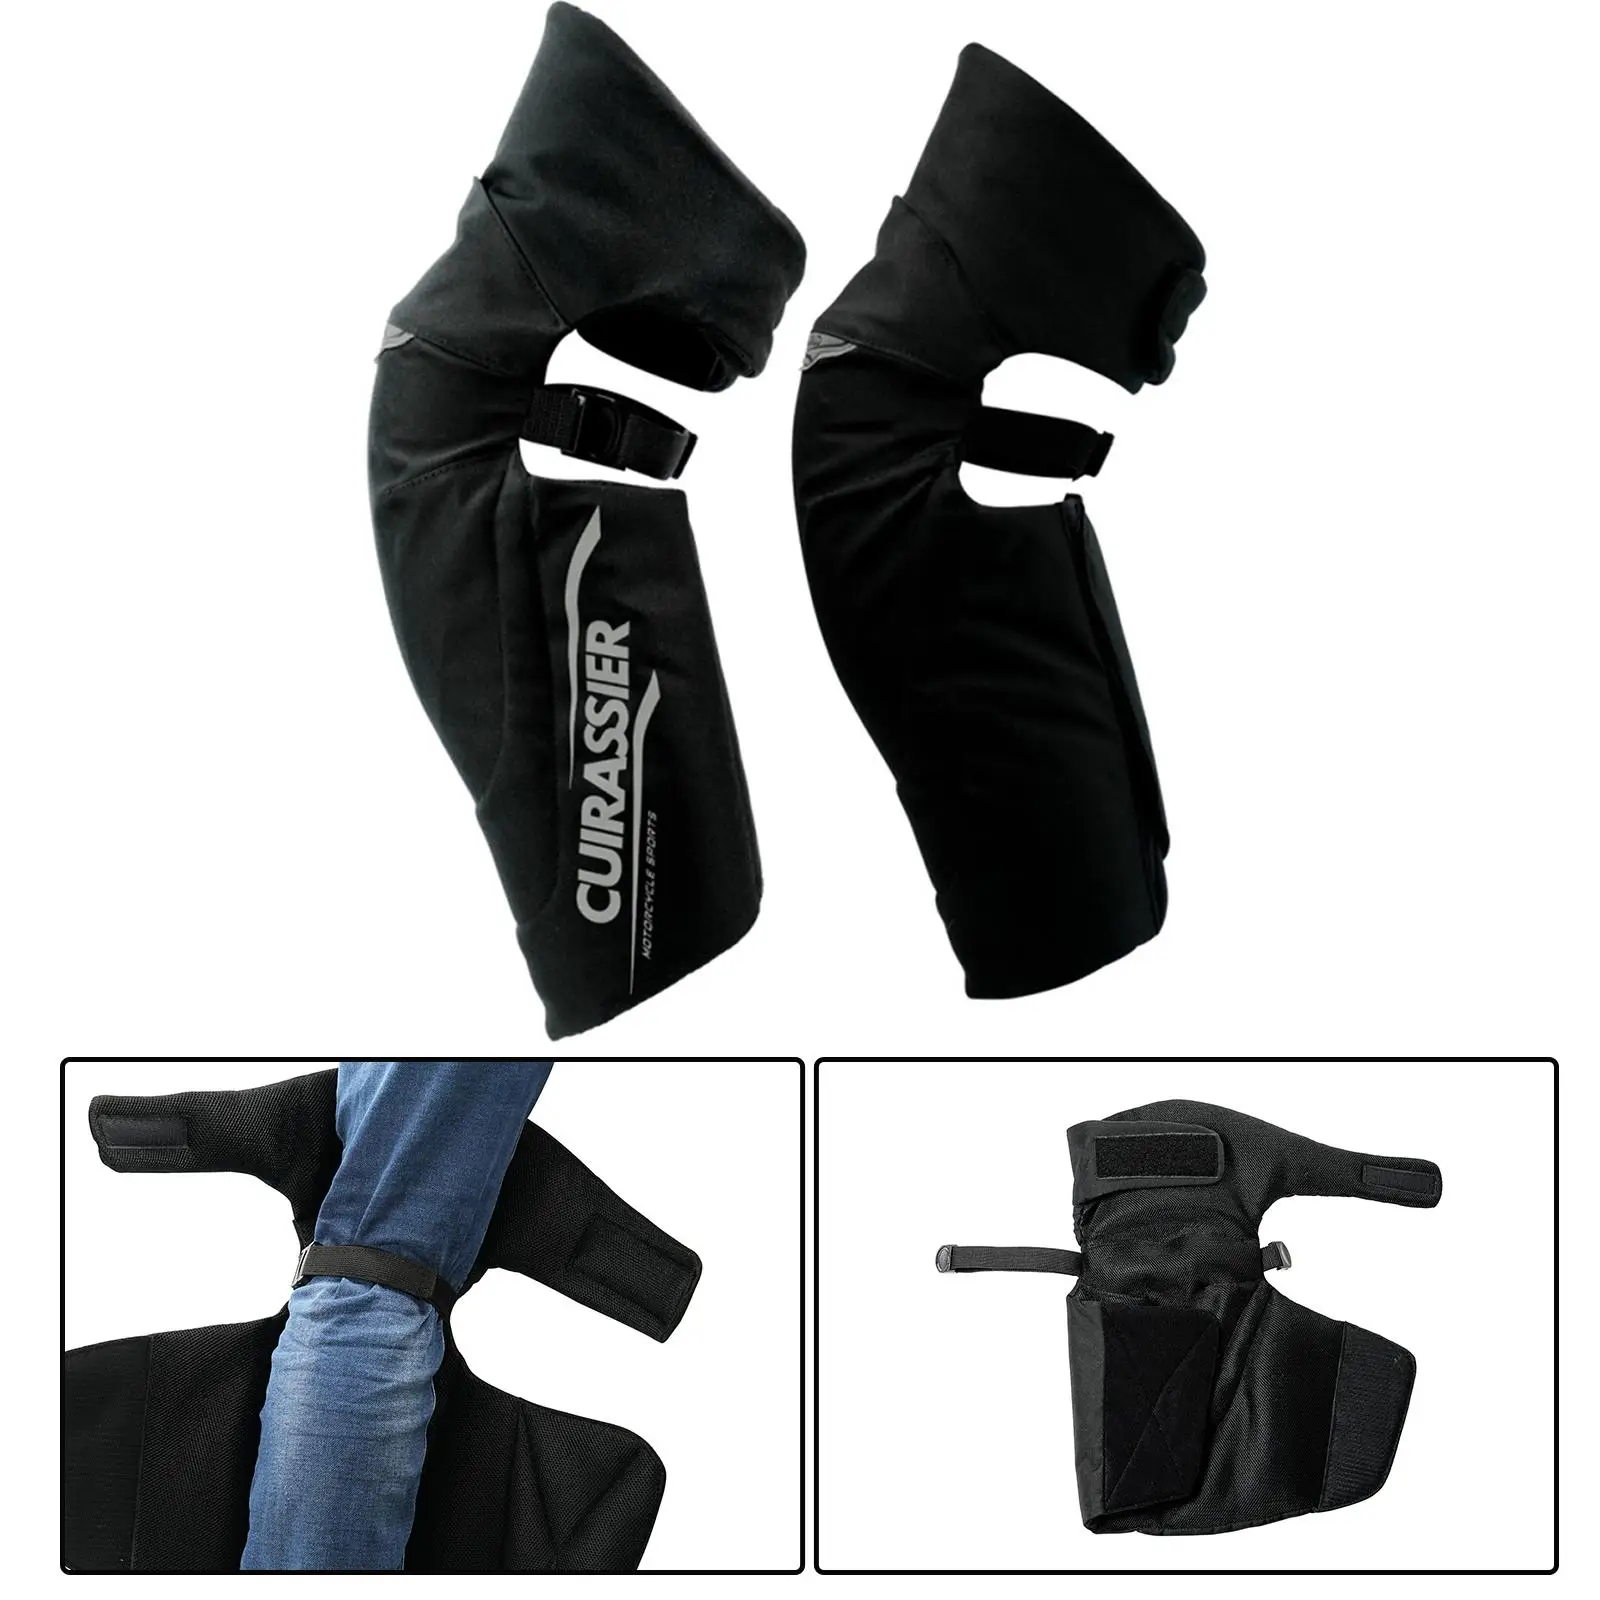 Motorcycle Knee Pads Guards Leggings Covers Fit for Cycling Skiing Winter